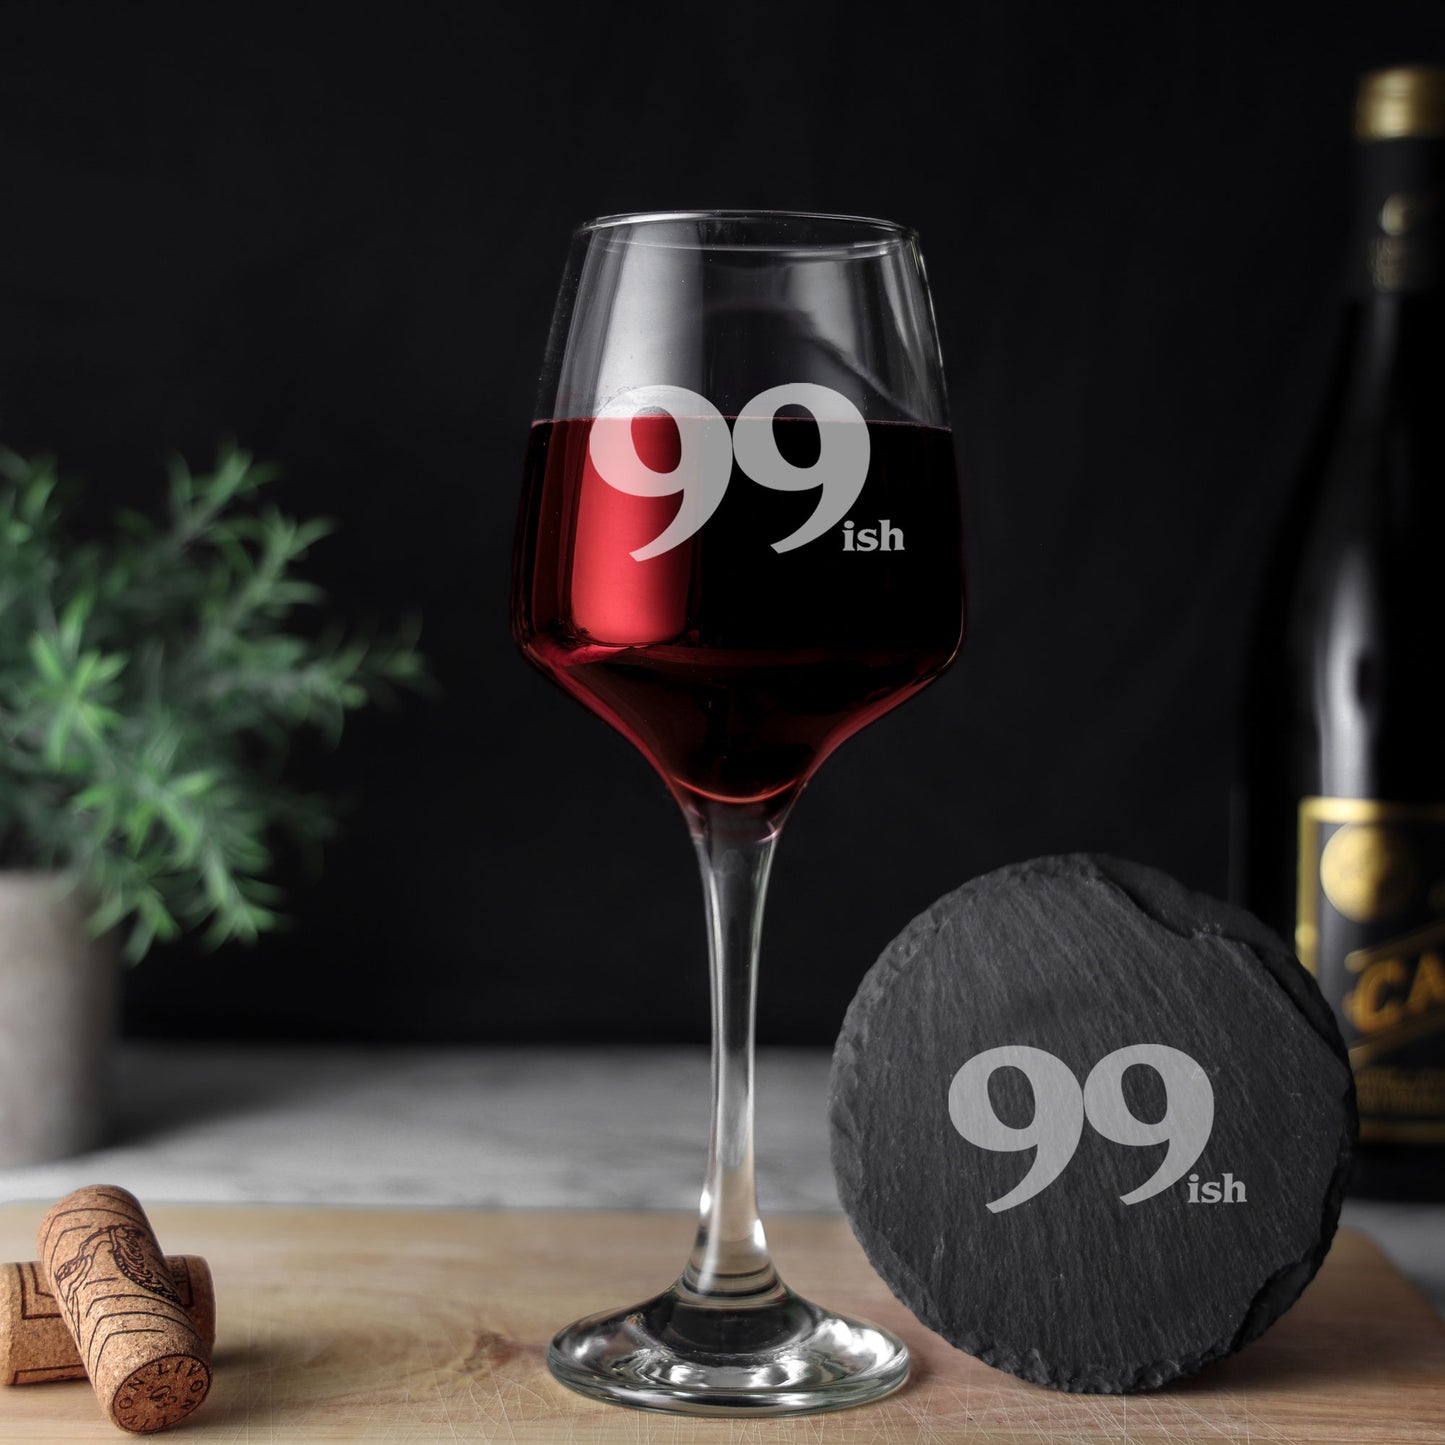 99ish Wine Glass and/or Coaster Set  - Always Looking Good - Glass & Round Coaster Set  